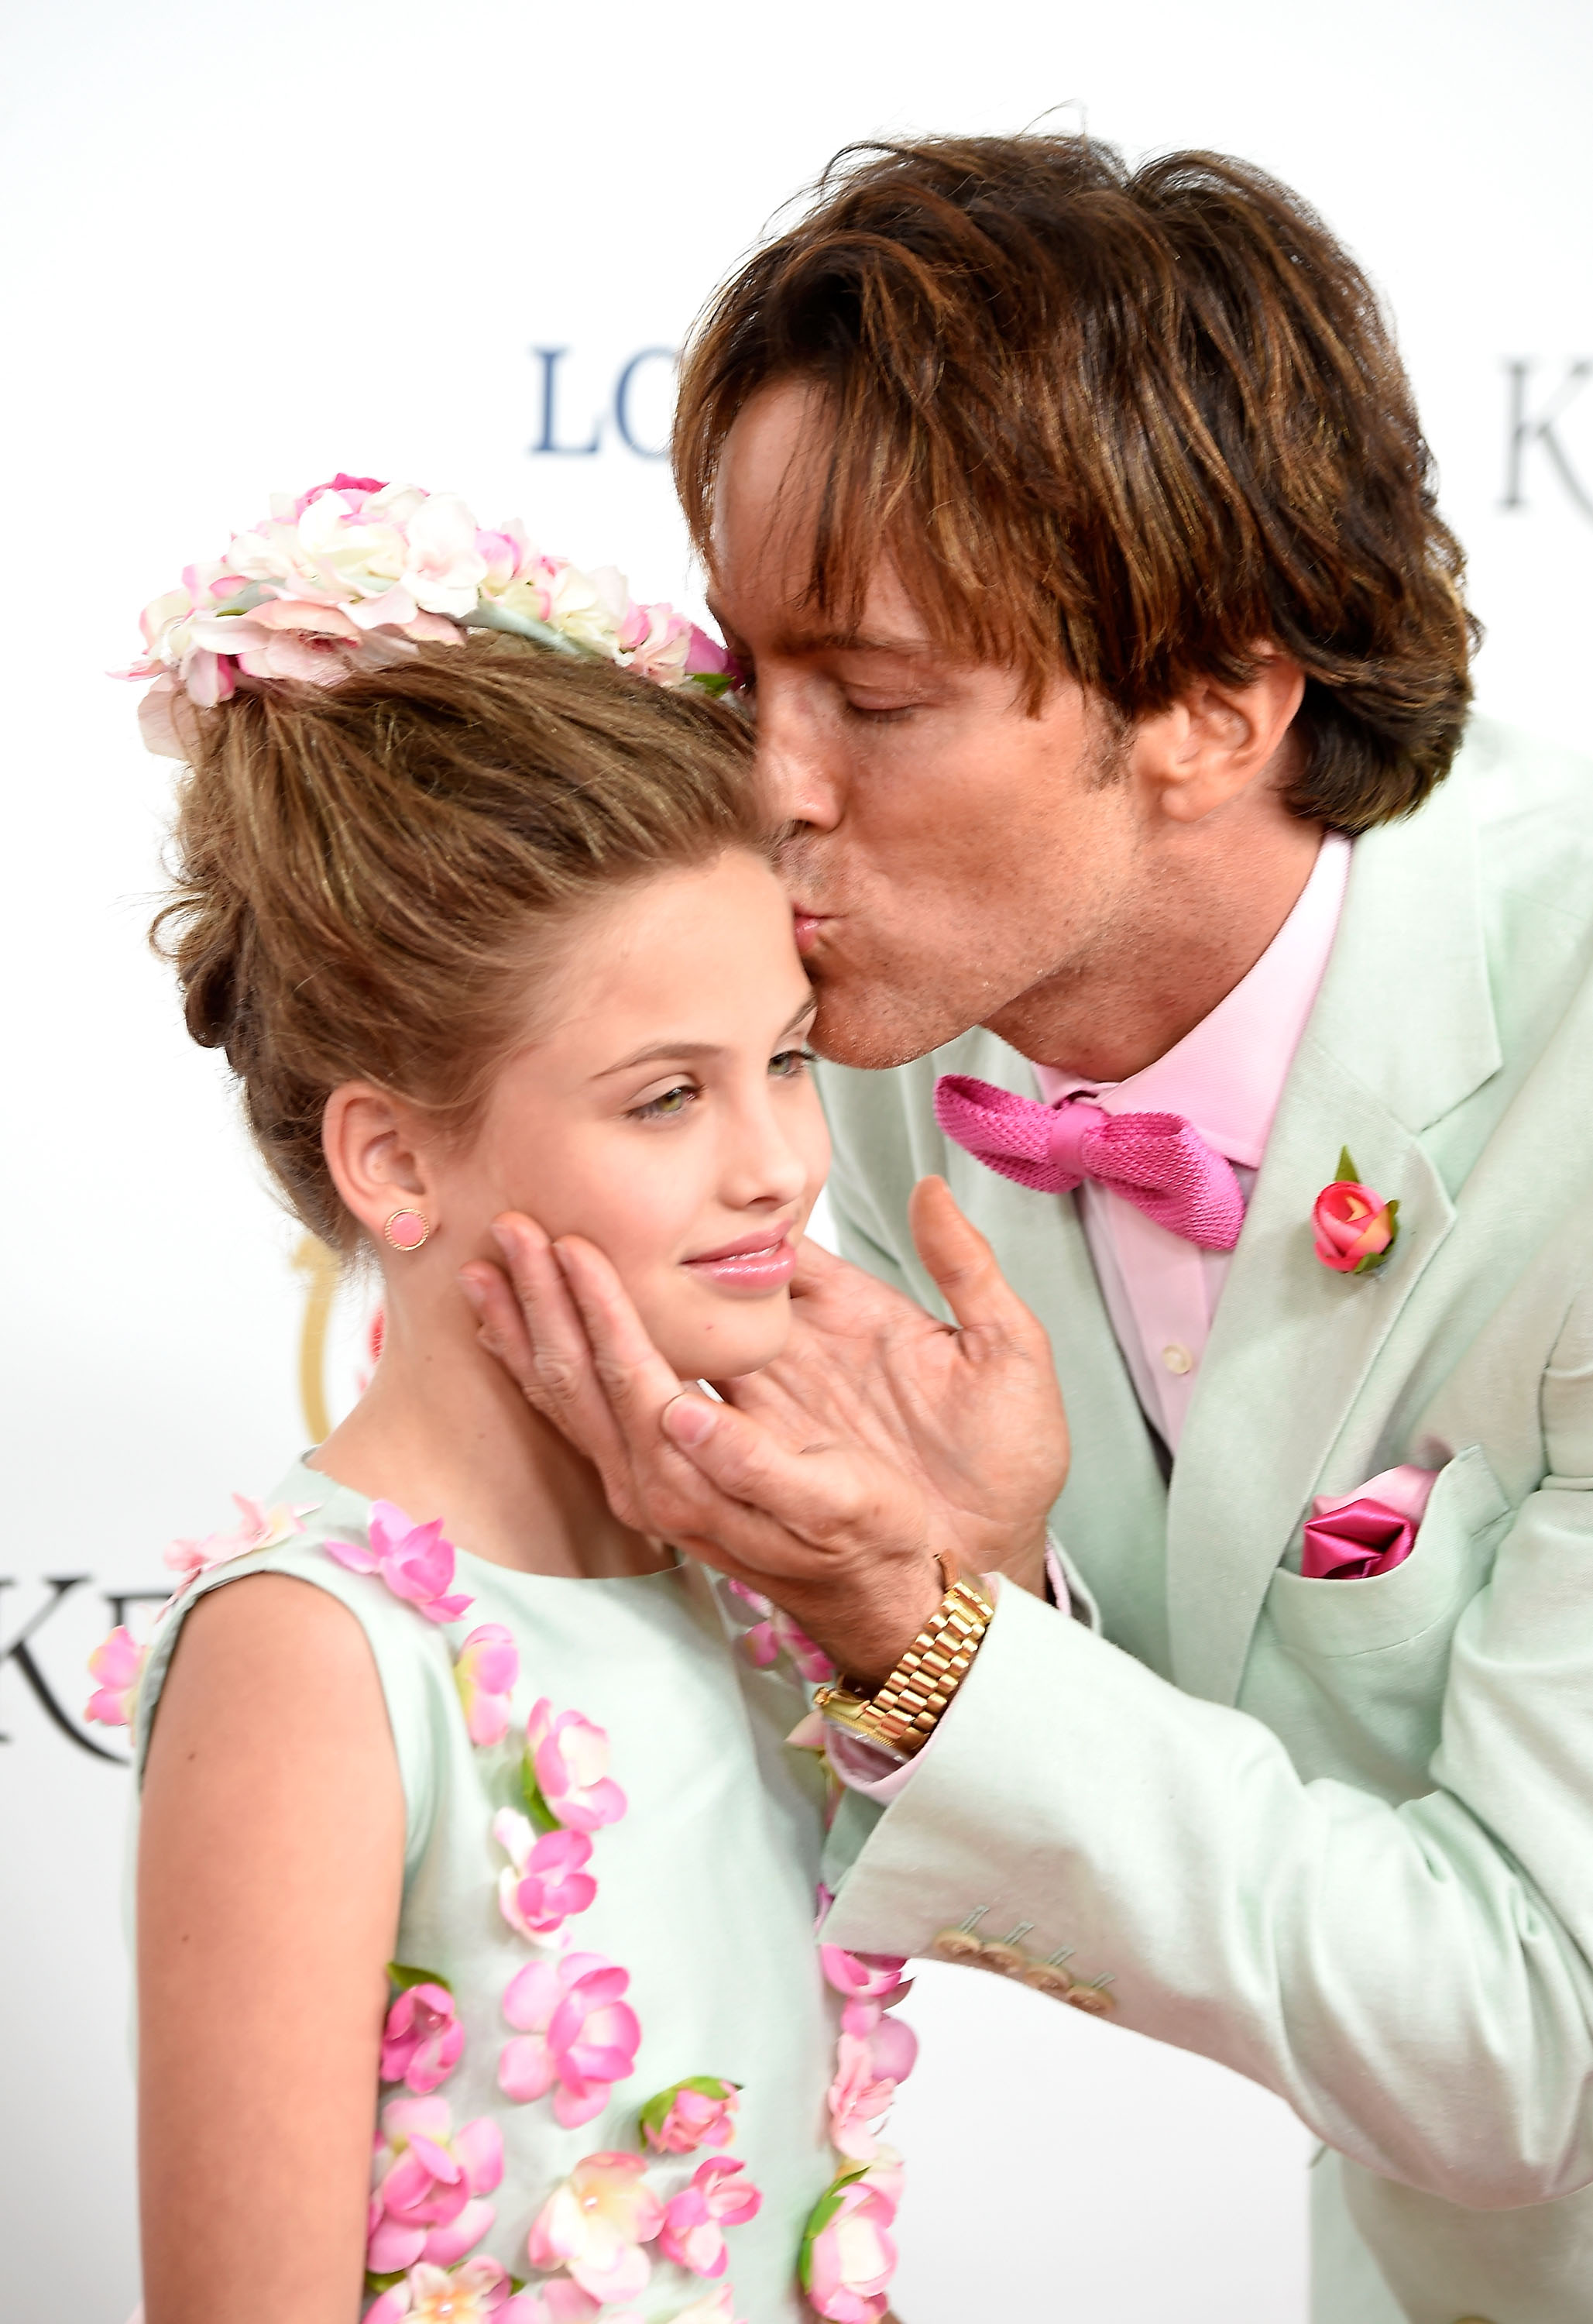 Larry Birkhead and Dannielynn Birkhead in Louisville, Kentucky for the 141st Kentucky Derby at Churchill Downs in 2016 | Source: Getty Images